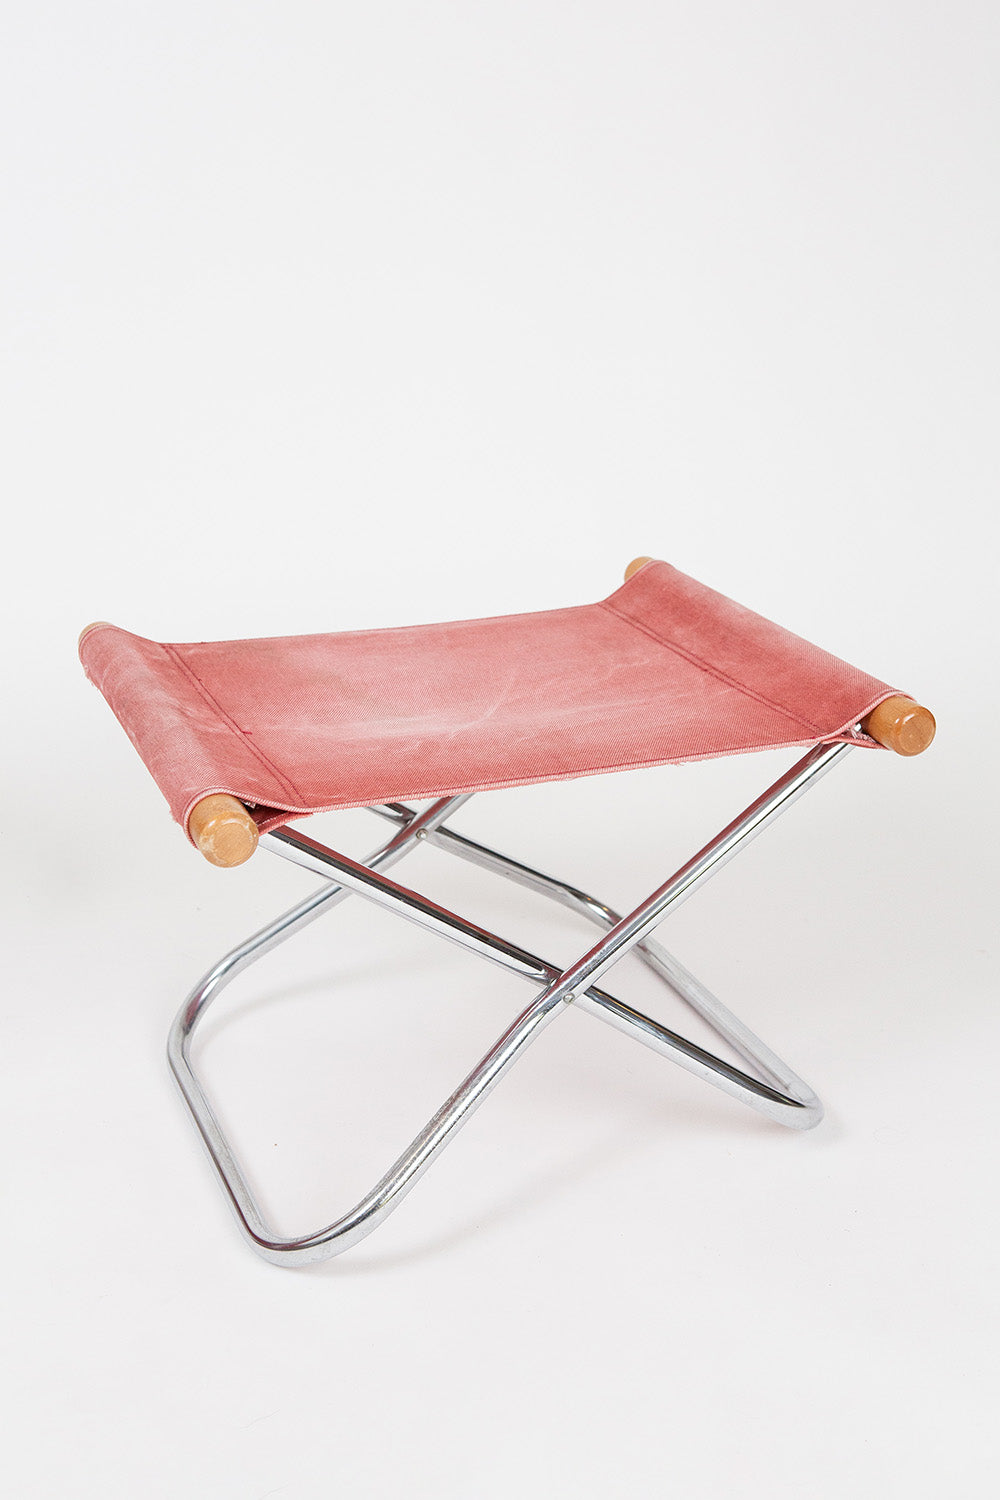 NY Folding Chair And Ottoman By Takeshi Nii, Japan C. 1950's/'60s